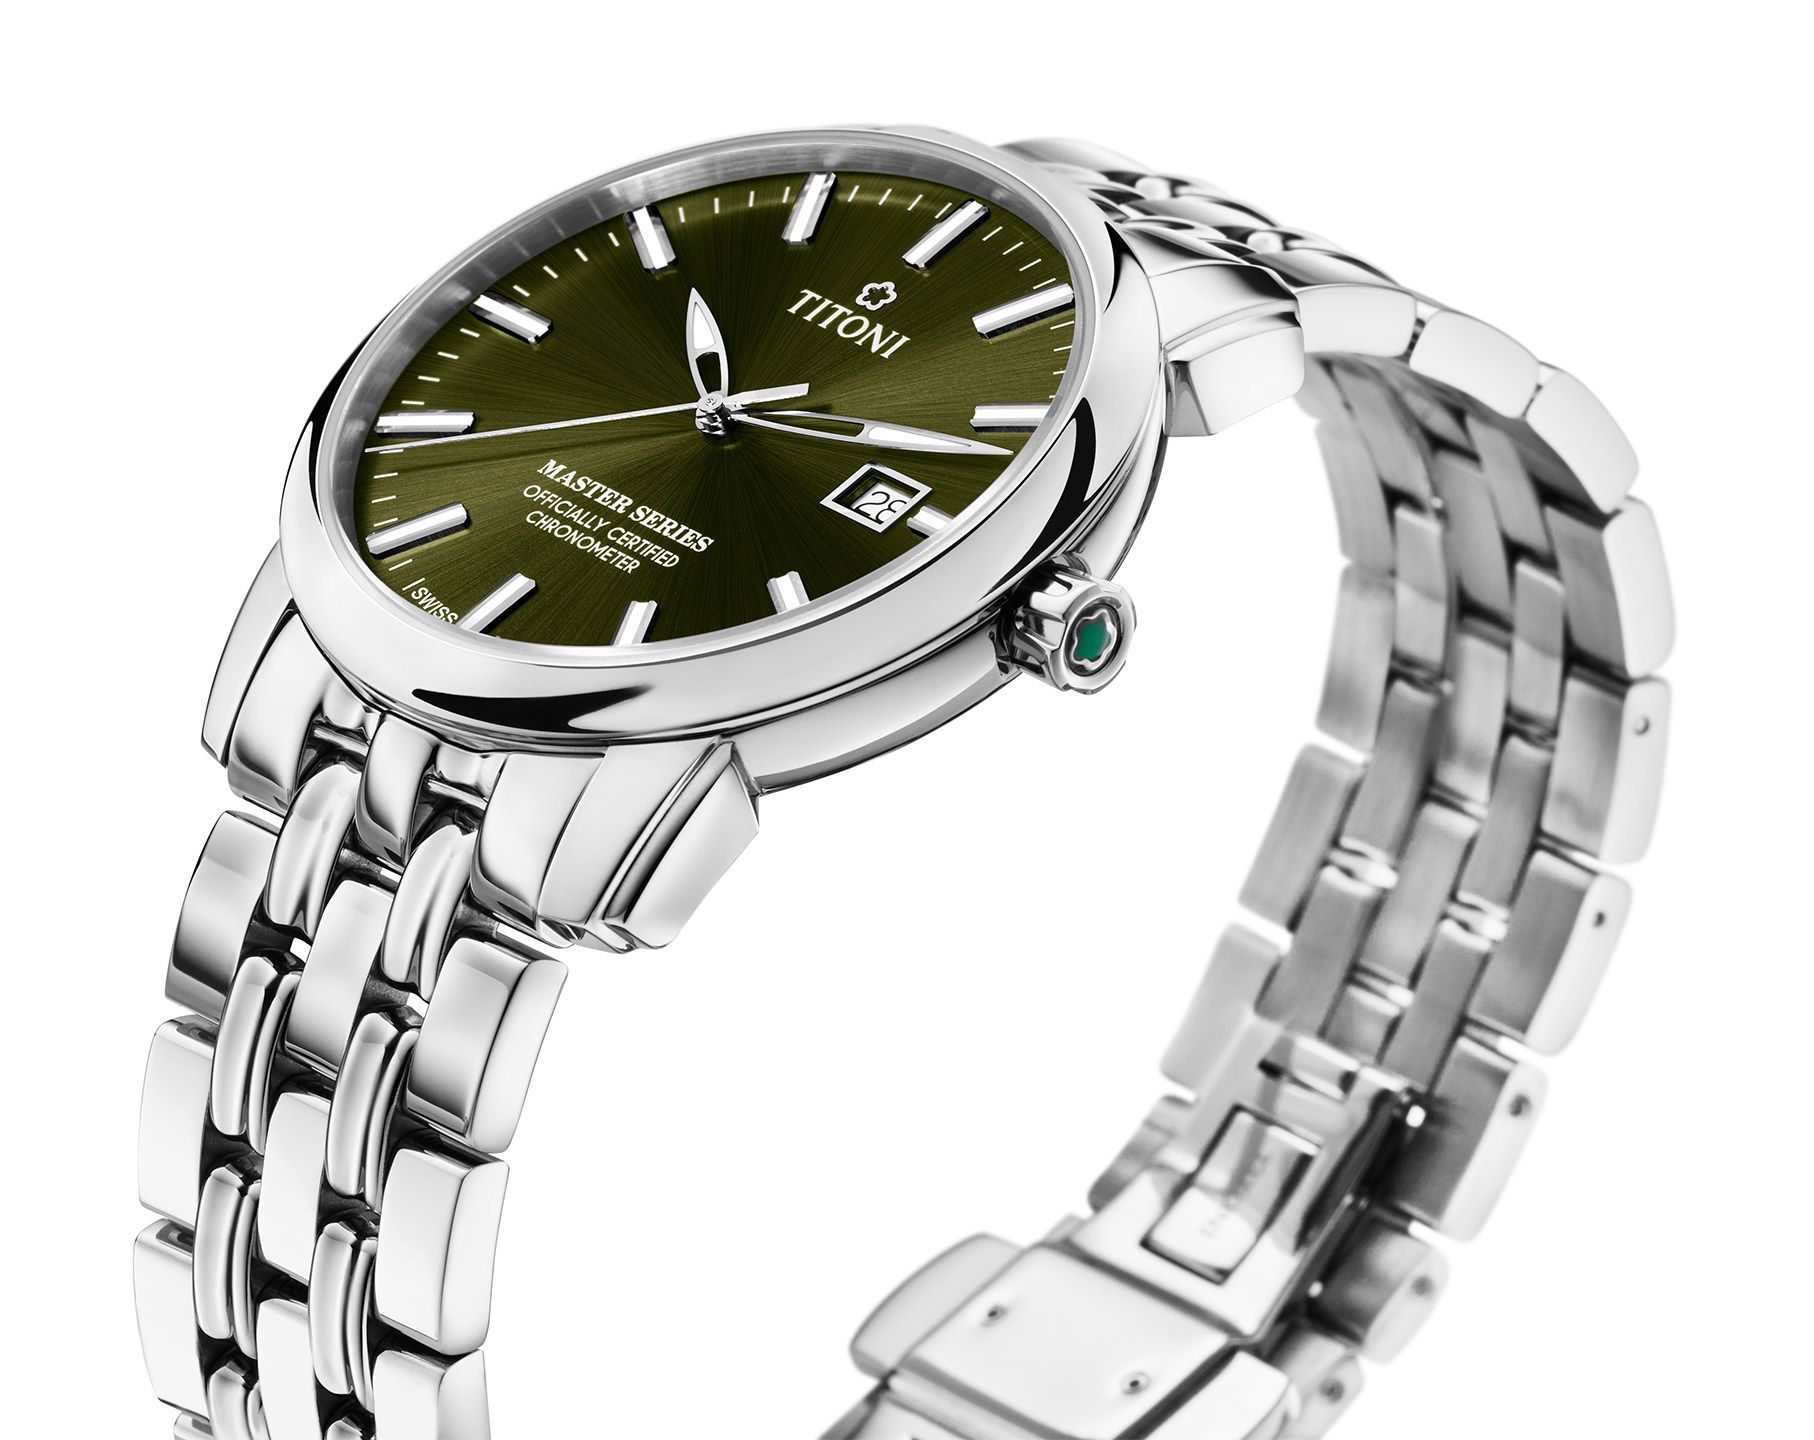 Titoni Master Series  Green Dial 41 mm Automatic Watch For Men - 2